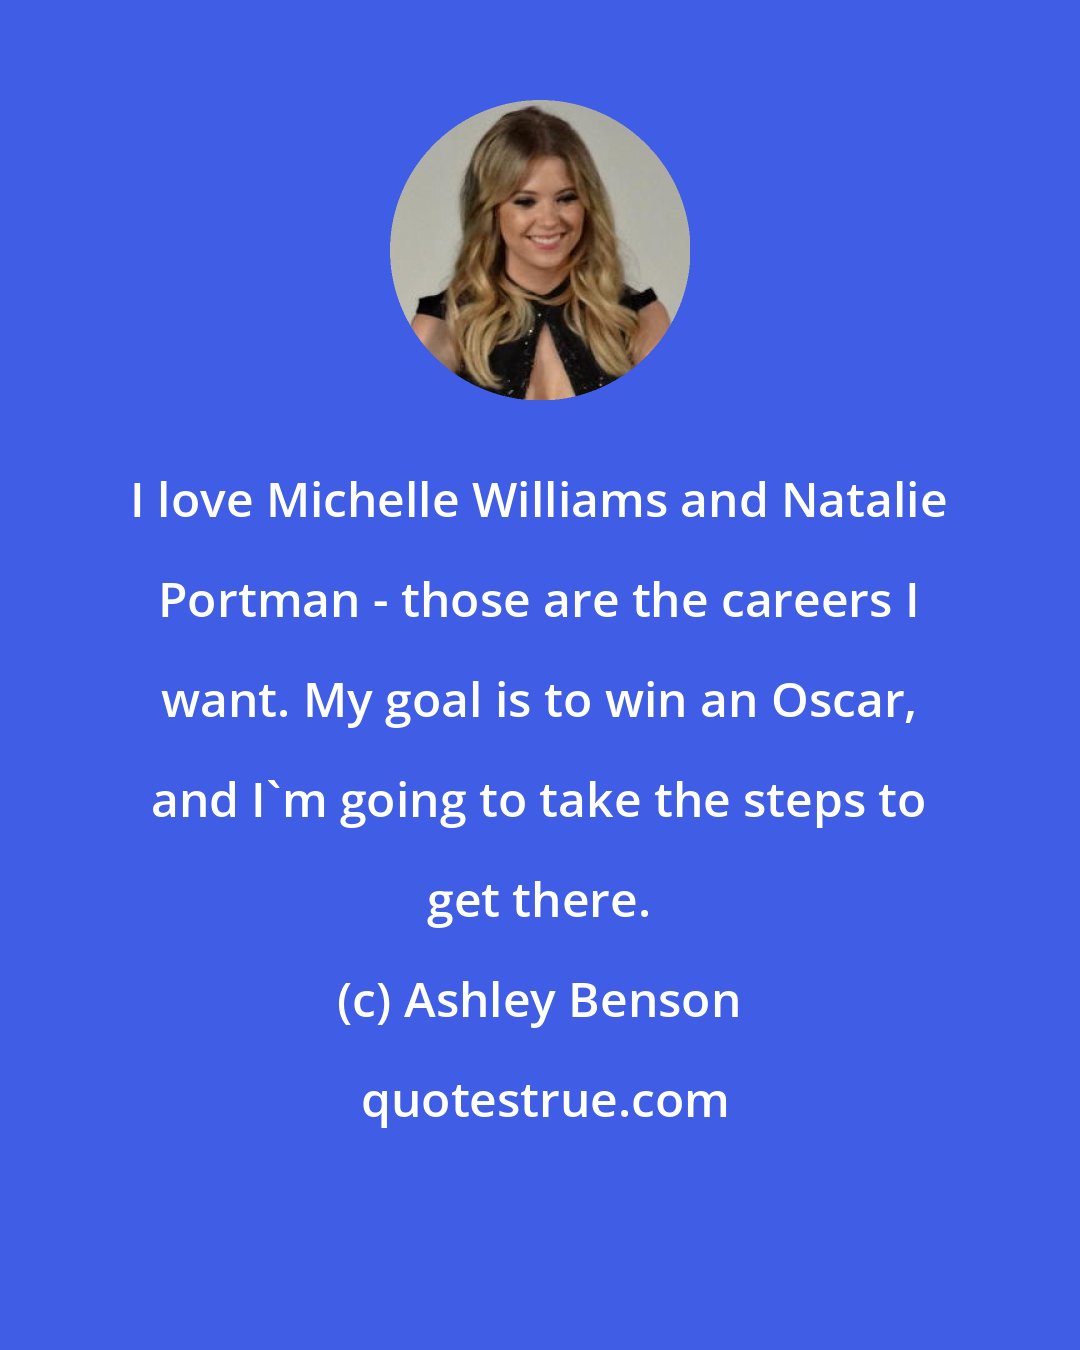 Ashley Benson: I love Michelle Williams and Natalie Portman - those are the careers I want. My goal is to win an Oscar, and I'm going to take the steps to get there.